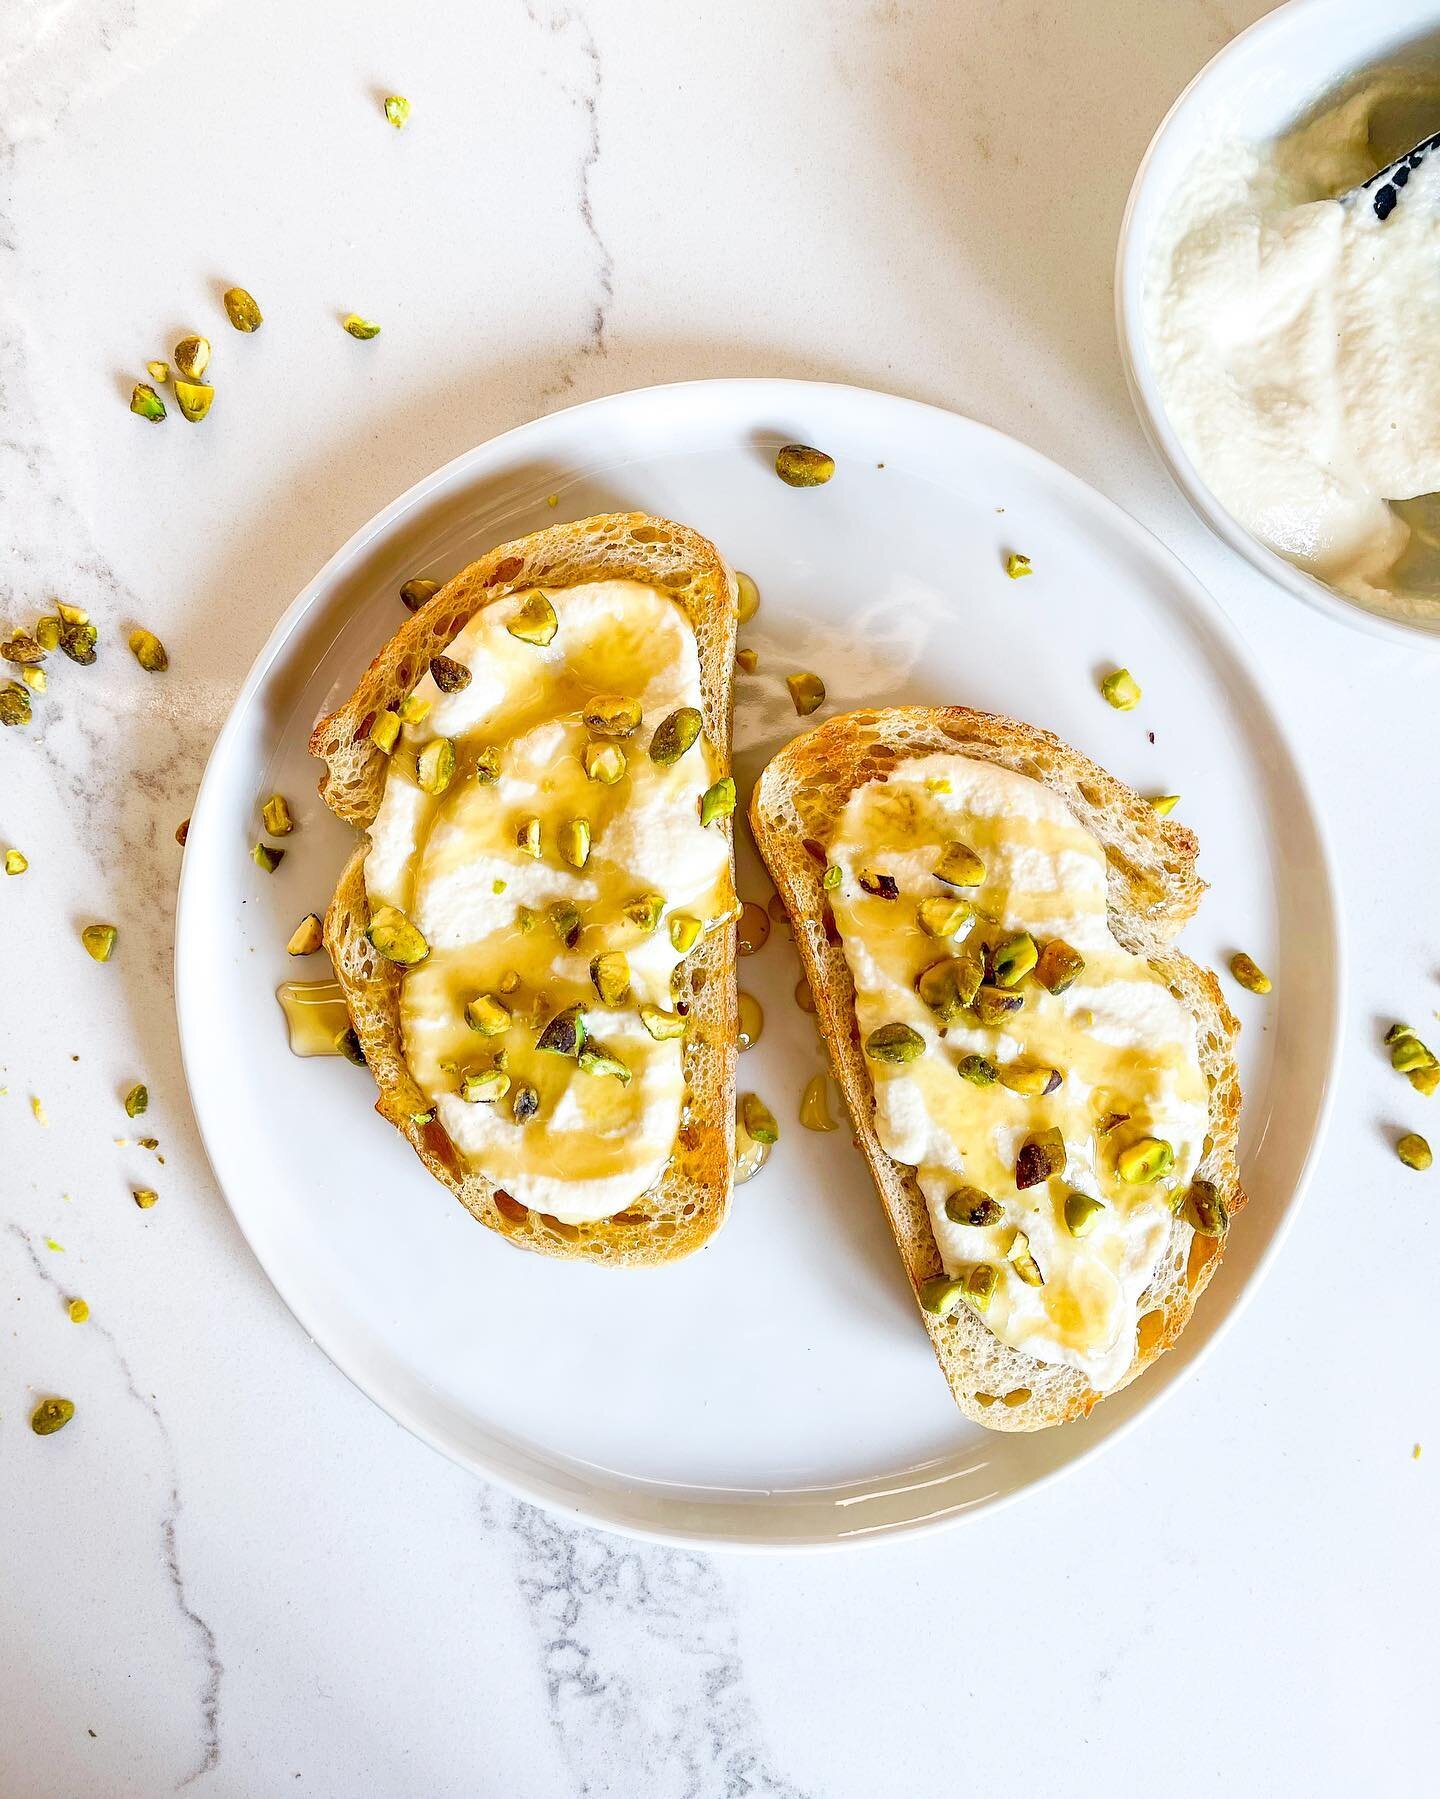 Anyone else a huge toast fan?! What&rsquo;s your ideal topping?

✨Whipped Almond &ldquo;Ricotta&rdquo; Toast with Honey and Pistachios✨ 

What you need ⬇️
- Blanched Slivered Almonds (@bluediamond is a great brand to use)
- Nutritional Yeast
- Lemon 